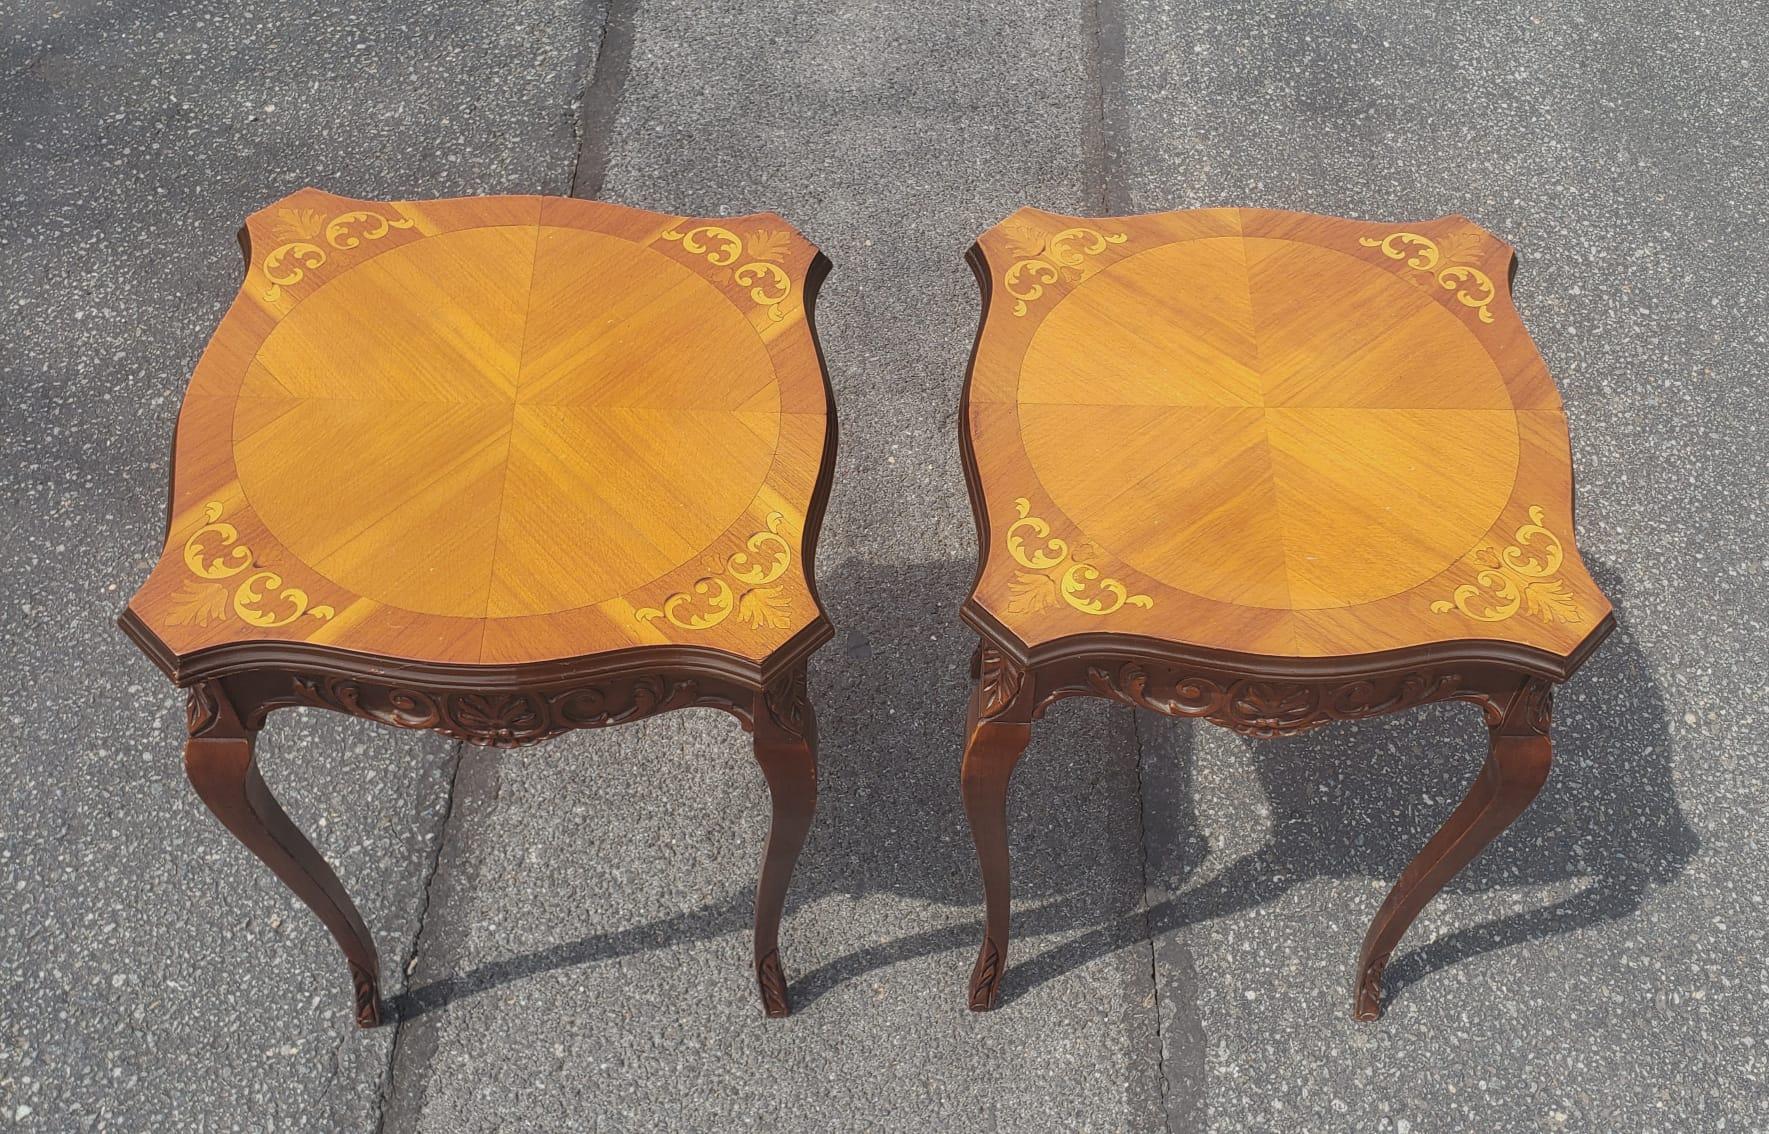 A Pair of Mid-Century French Empire Style Carved Walnut and Marquetry Side Tables in good vintage and sturdy condition. Measure 17.5